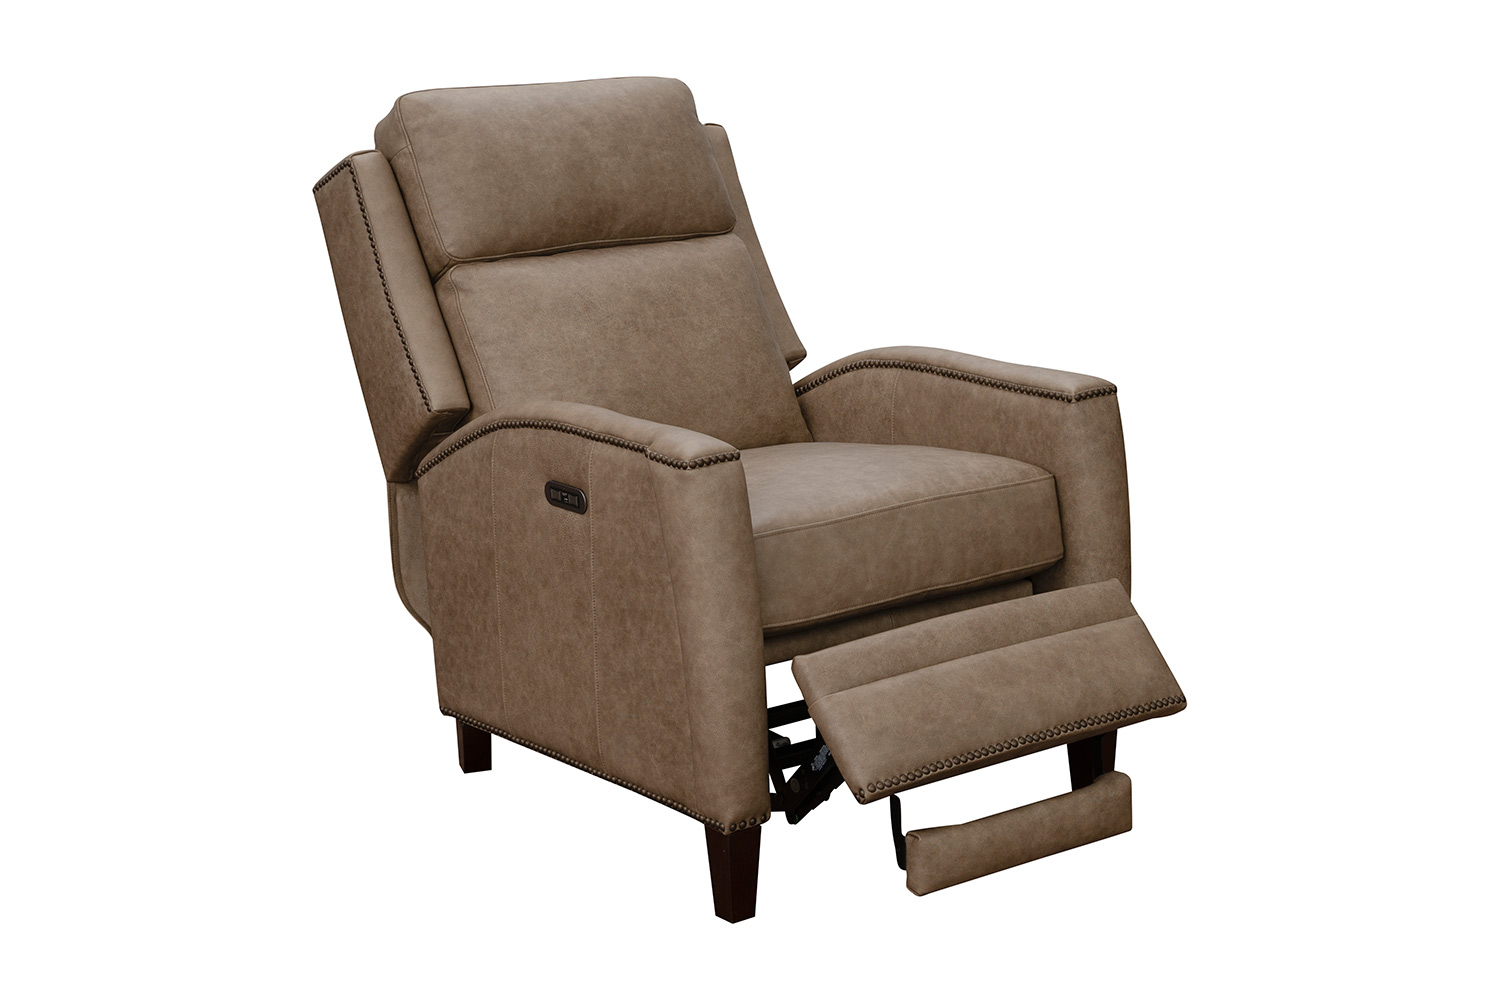 Barcalounger Nolan Voice Activated Power Recliner Chair with Power Head Rest - York Taupe/all top grain leather